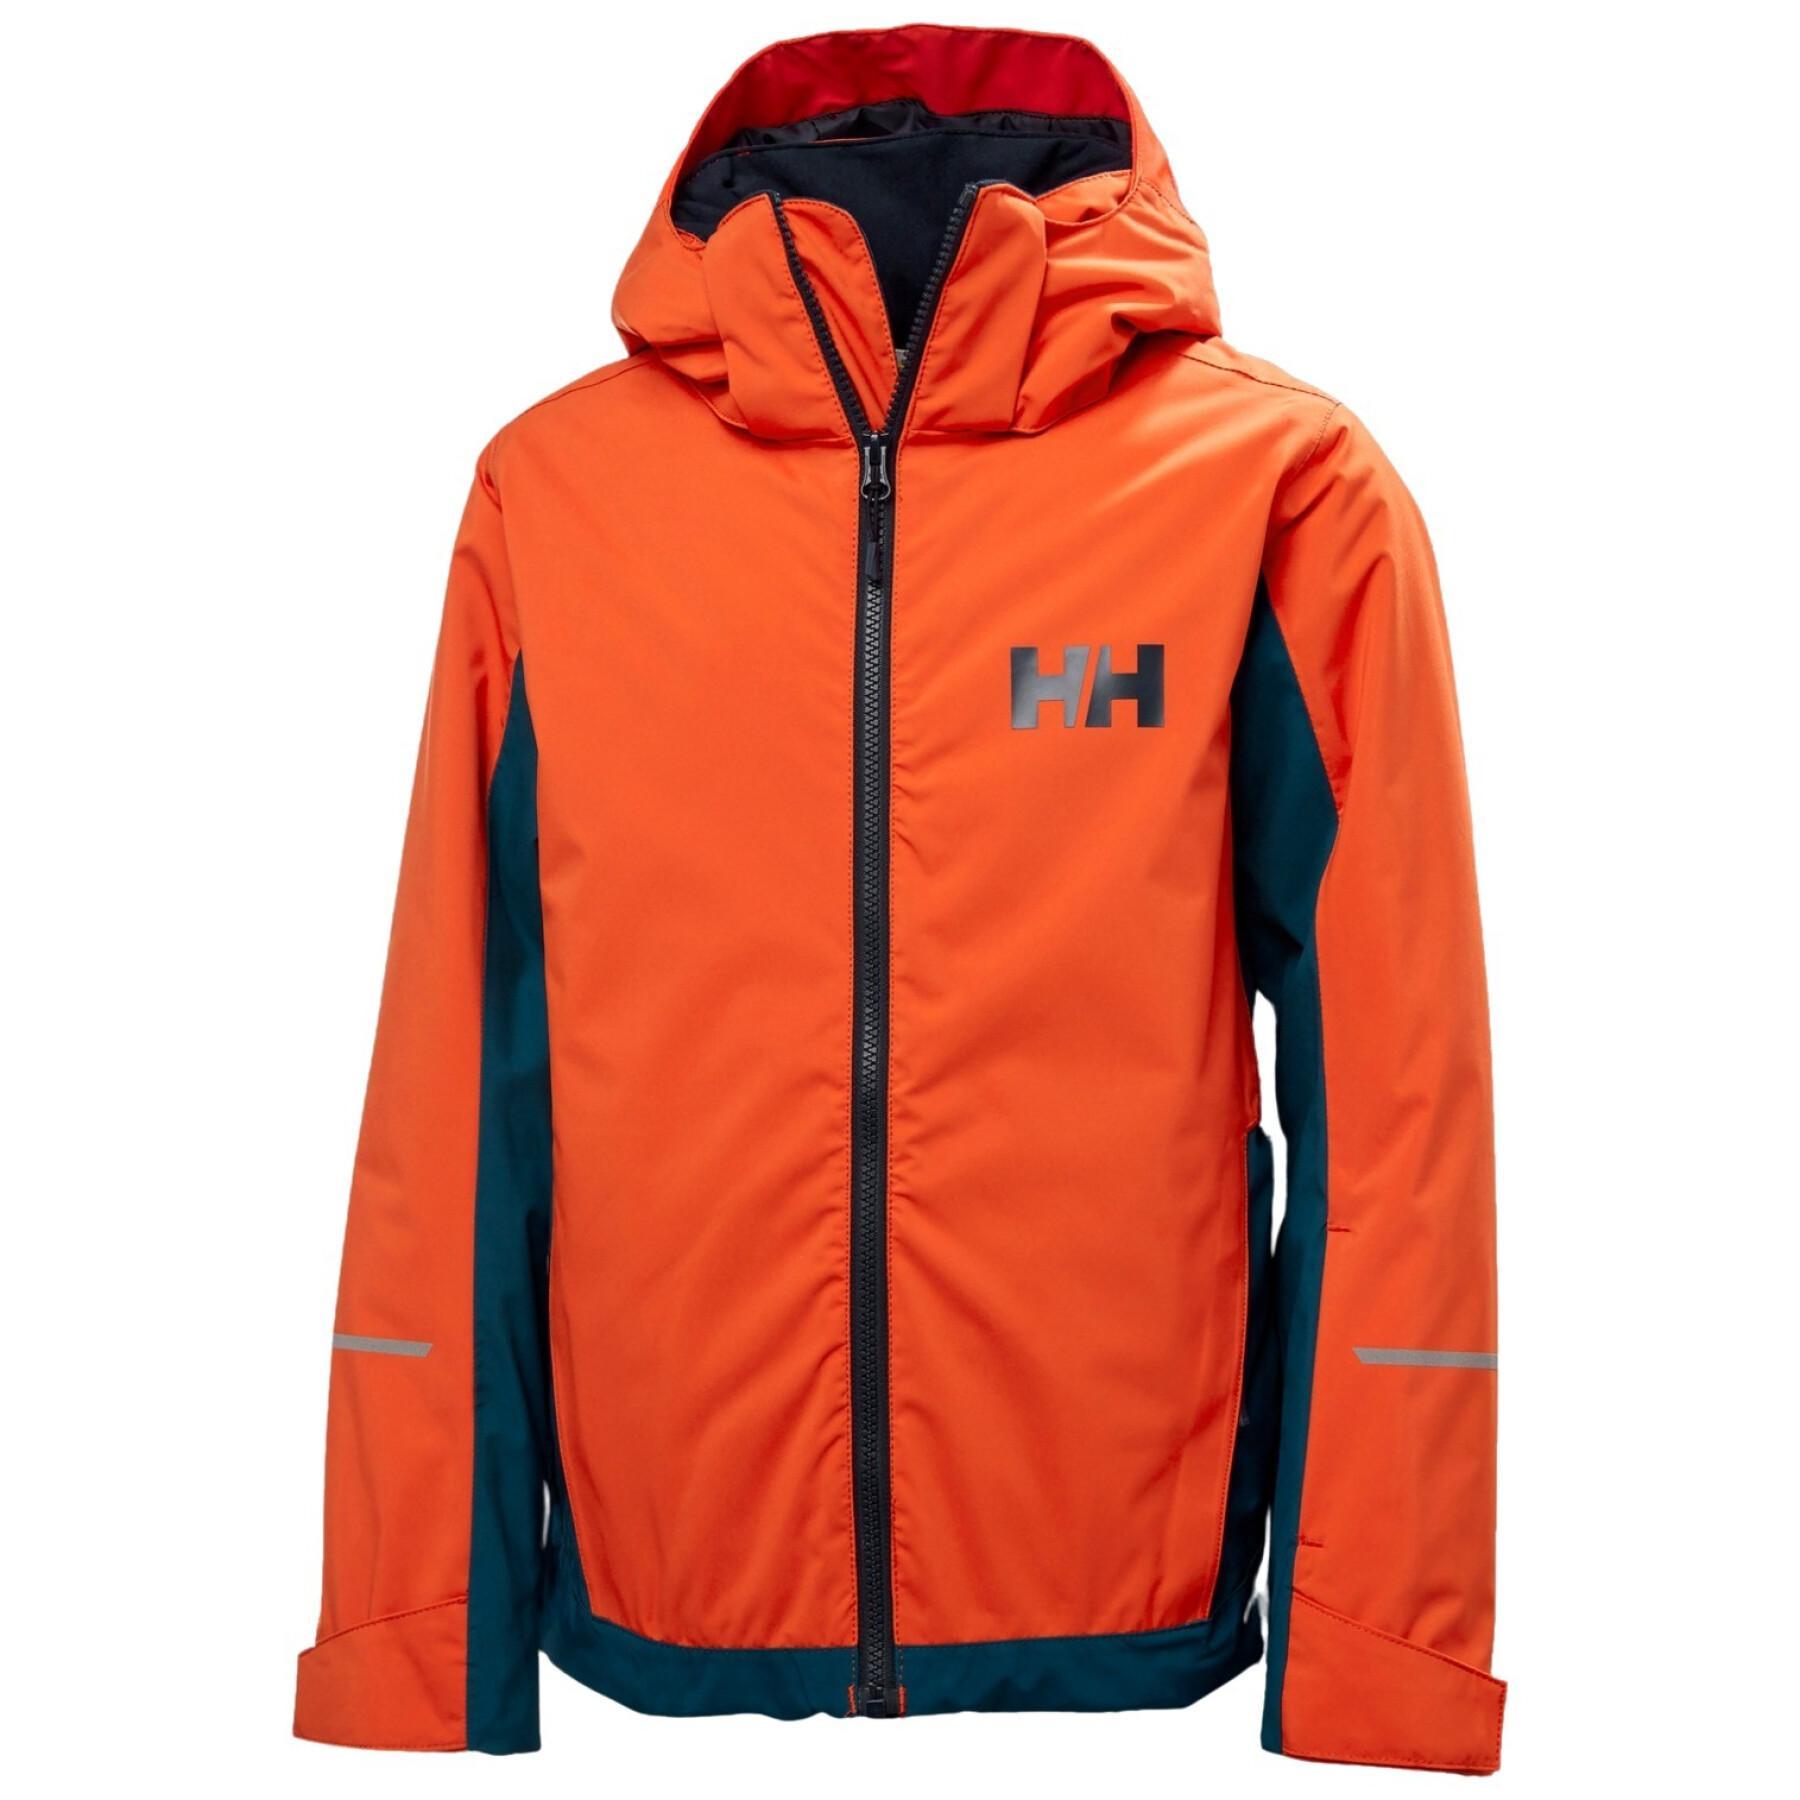 https://media.sneakids.es/catalog/product/cache/image/1800x/9df78eab33525d08d6e5fb8d27136e95/h/e/helly-hansen_41763-300_0.jpg